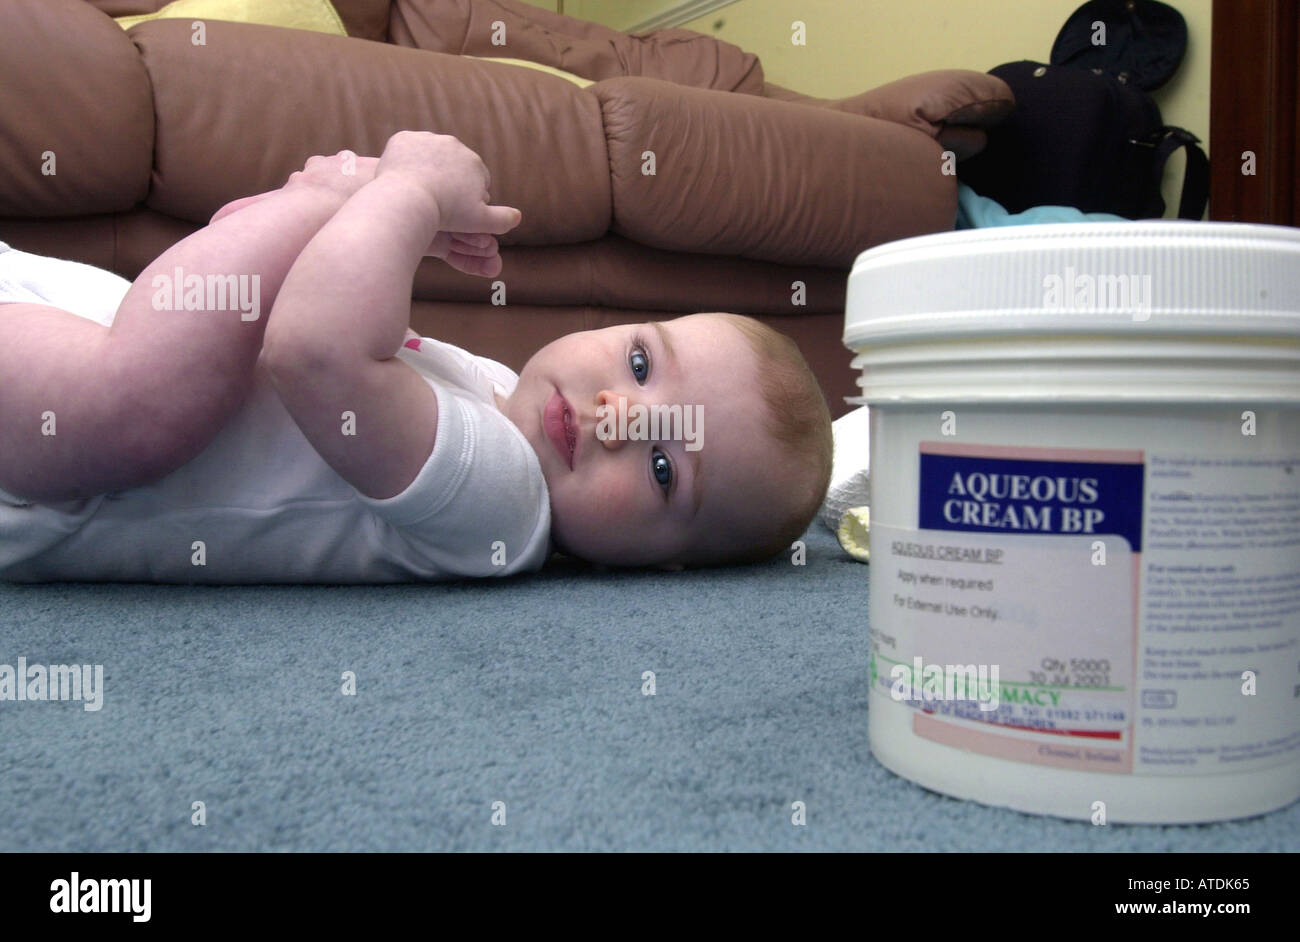 Baby lies on a carpet with some aqueous cream in the foreground UK Stock Photo